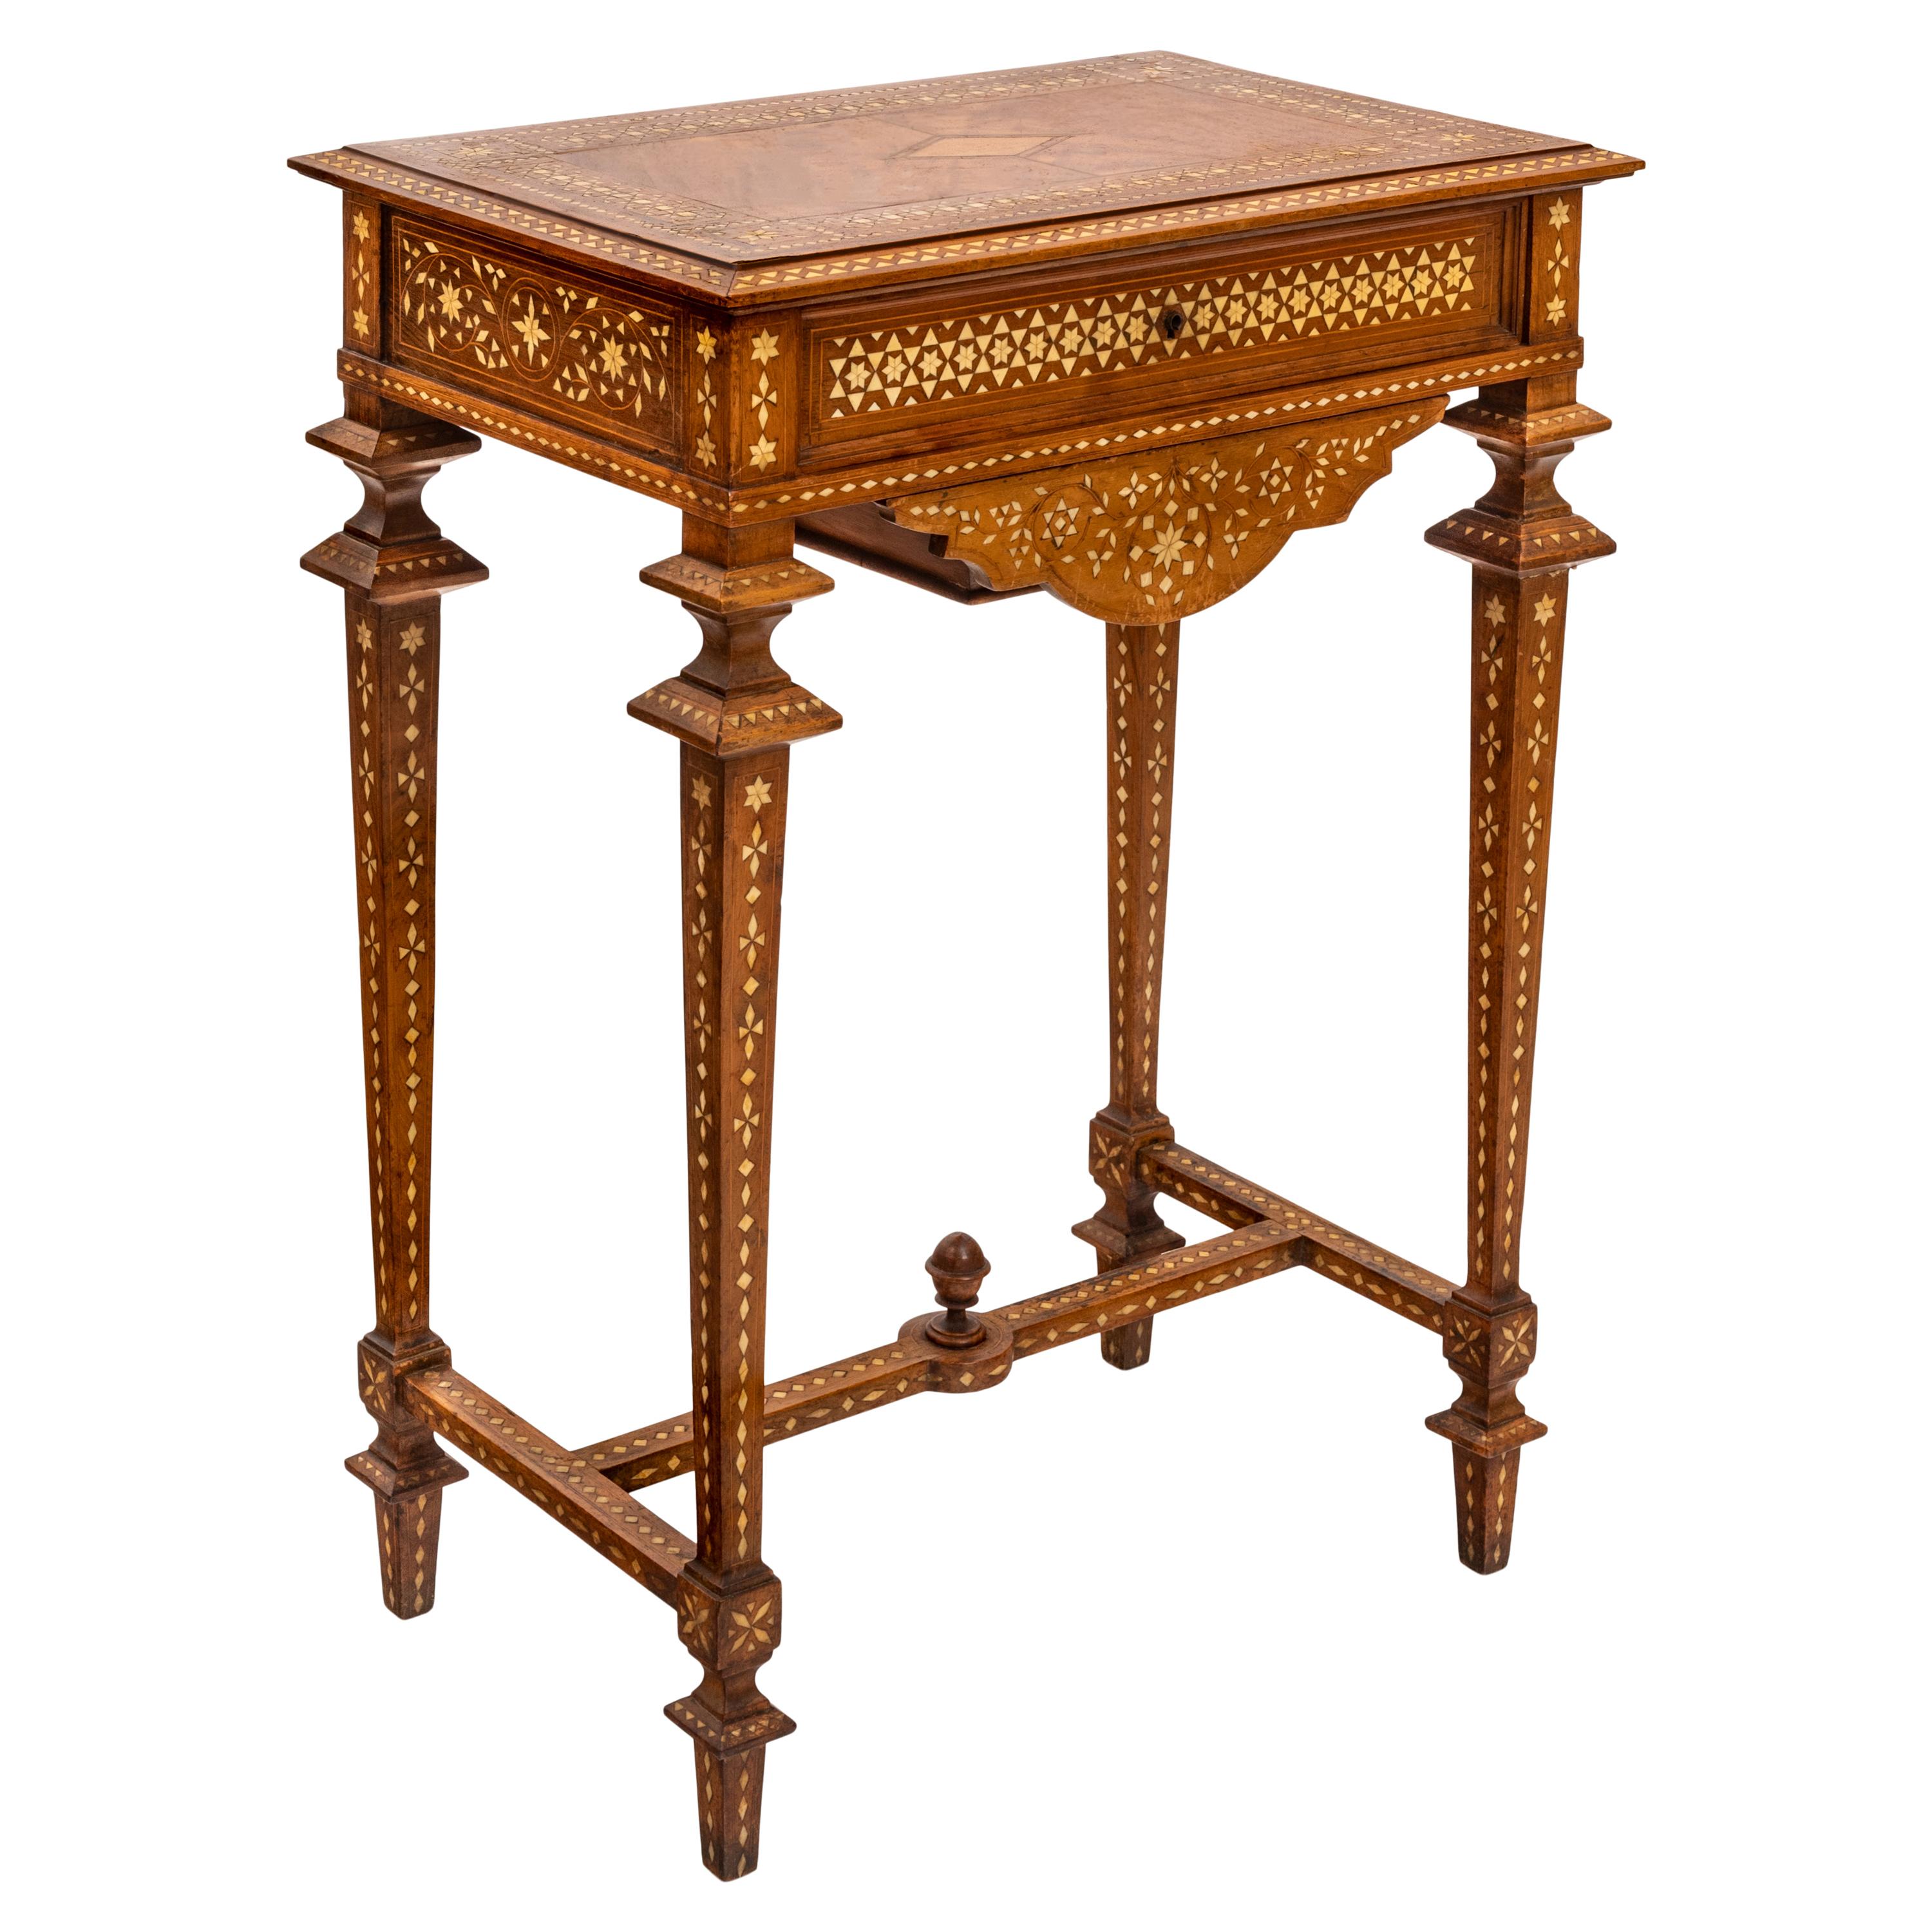 A good antique Anglo-Indian inlaid marquetry side /work table, circa 1870.
This very elegant antique table is profusely inlaid with geometric bone marquetry and exotic hardwood inlay. The rectangular top inlaid with rosewood stringing, mahogany and